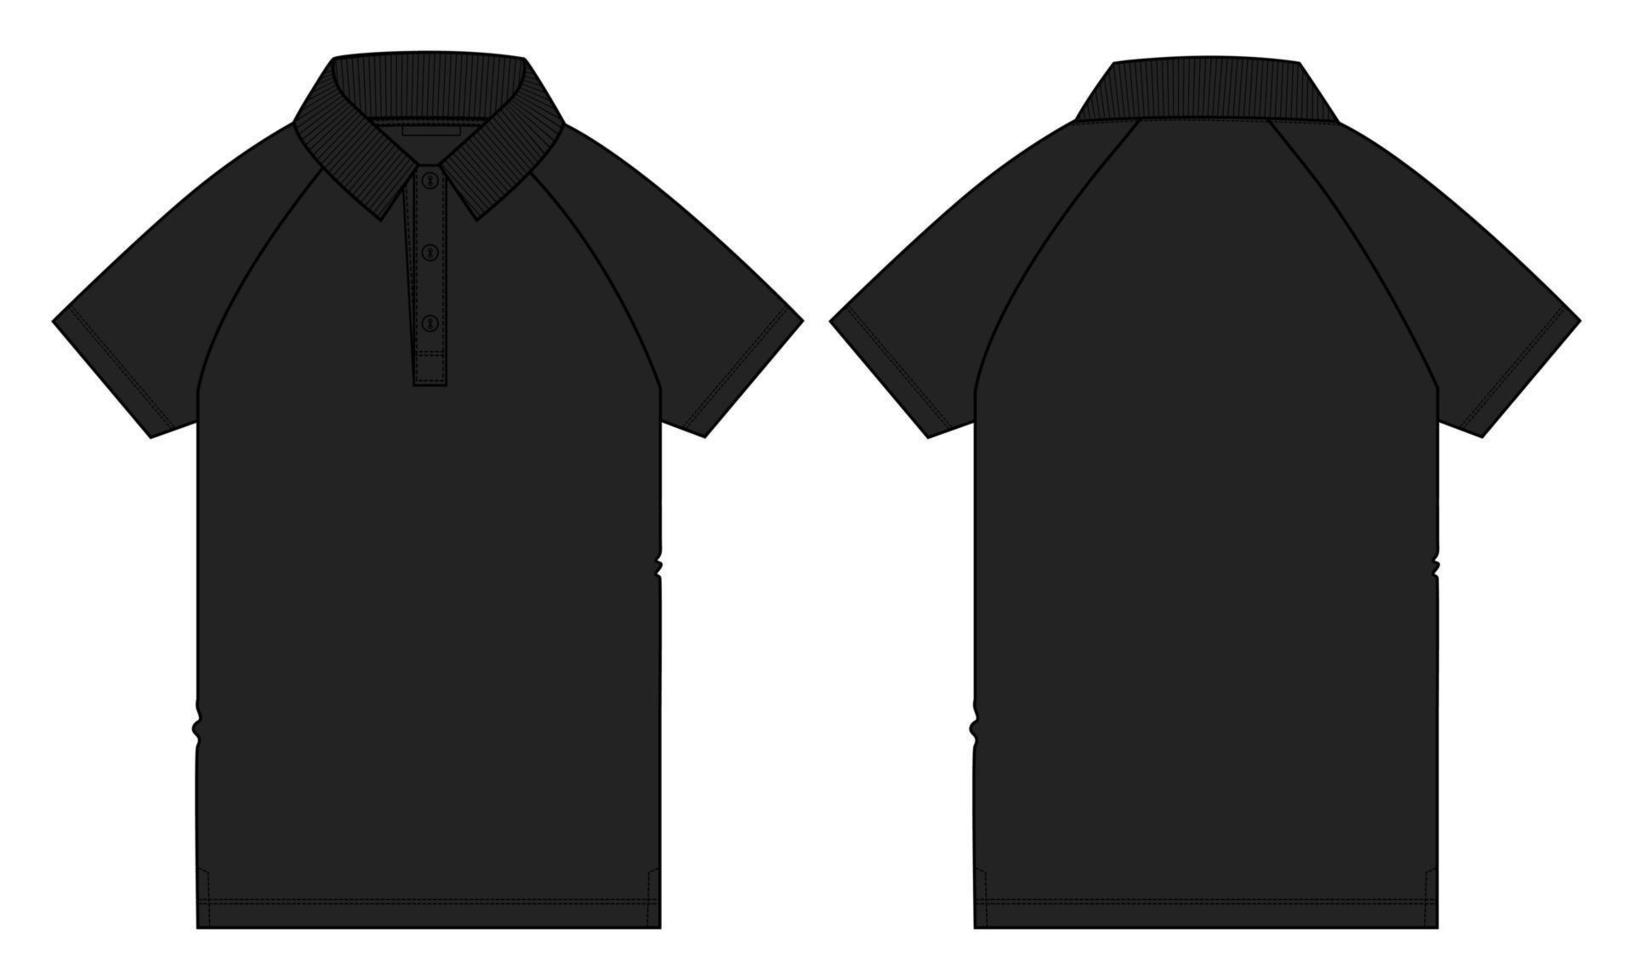 Short Sleeve Raglan Polo shirt Technical Fashion flat  sketch Vector illustration Black Color template front and back views.